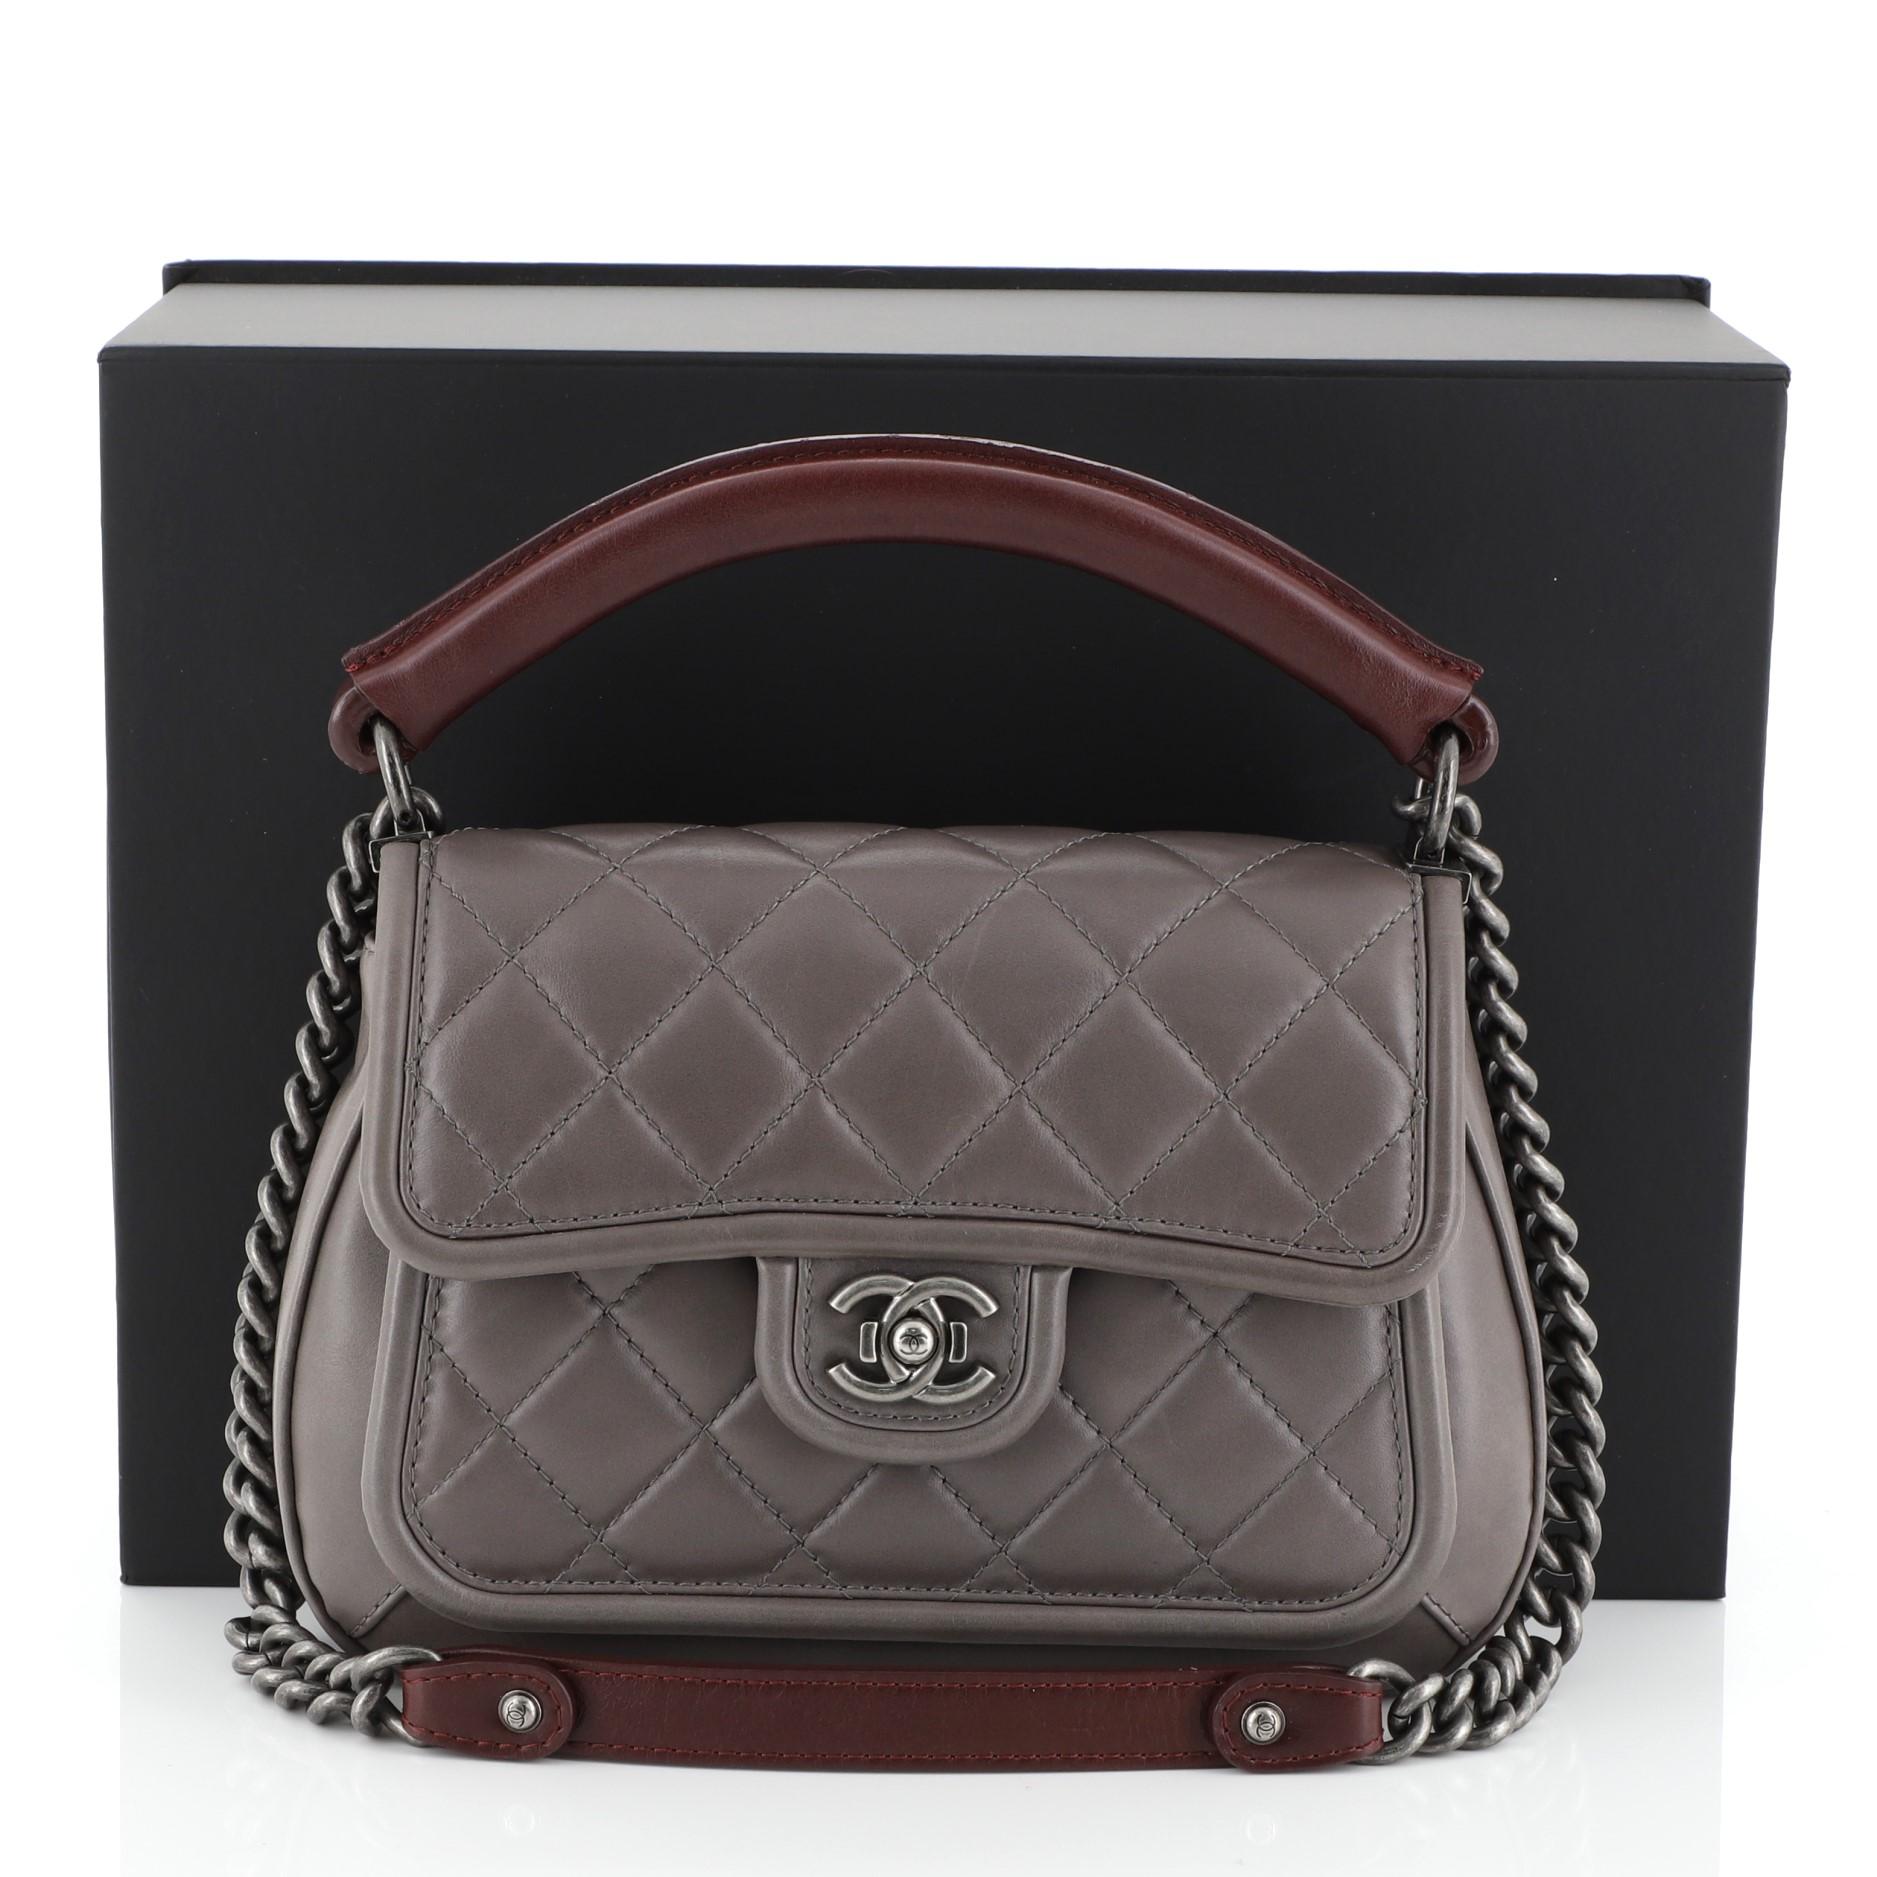 This Chanel Prestige Flap Bag Quilted Calfskin Medium, crafted in gray quilted calfskin leather, features a sturdy leather top handle, chain-link shoulder strap with shoulder pad, CC press lock closure and aged silver-tone hardware. Its press-lock